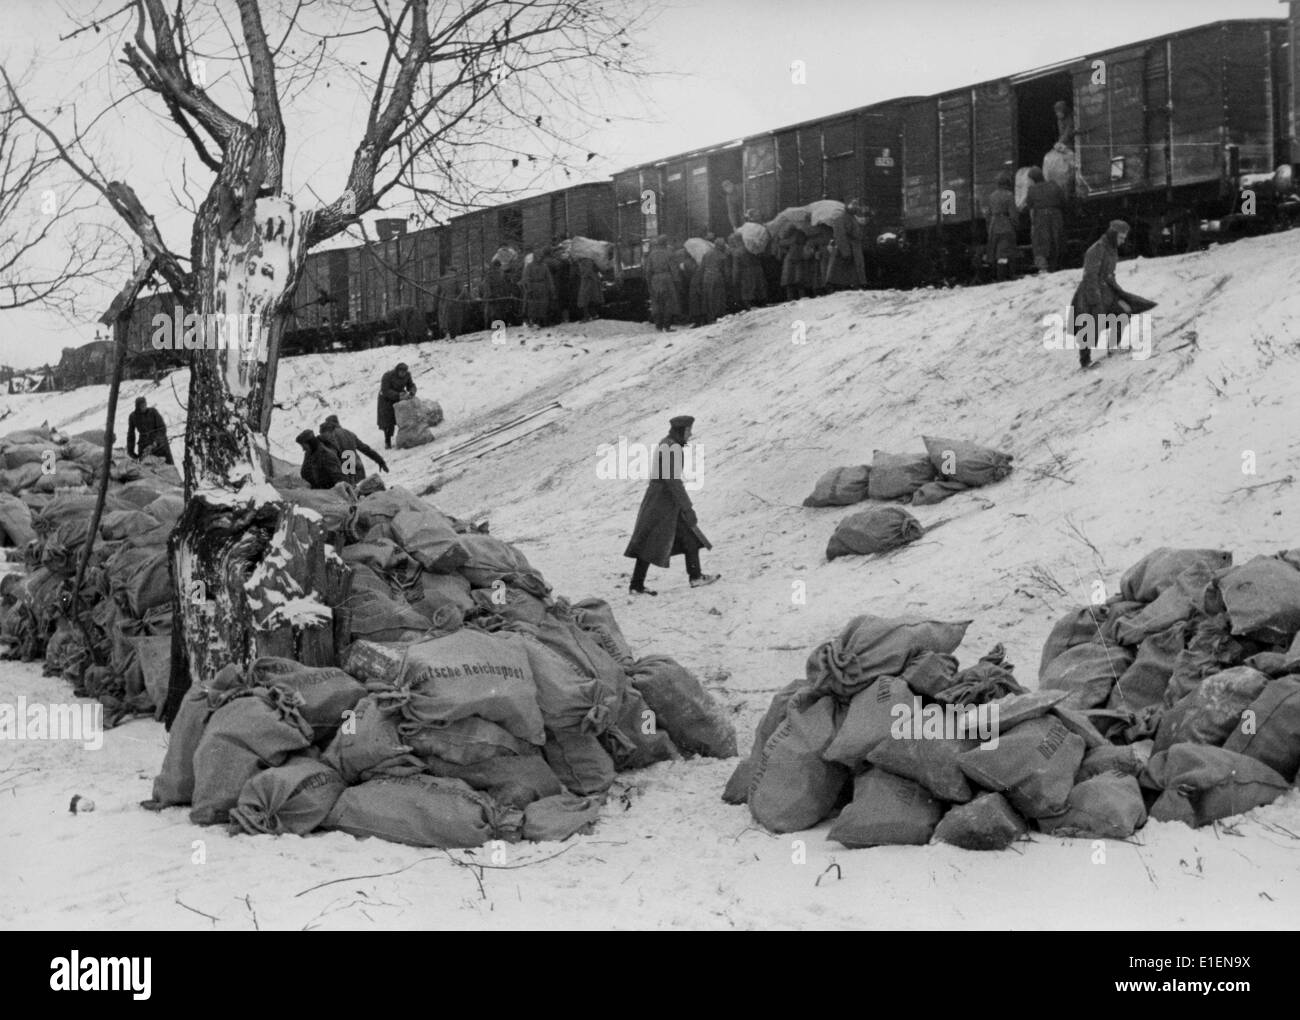 German soldiers load bags filled with post onto the trains at the Eastern Front in December 1941. The original text from the Nazi news report reads 'On the Eastern Front. The post is there! Giant heaps of mail for our soldiers arrives at the front.' Fotoarchiv für Zeitgeschichtee - NO WIRE SERVICE Stock Photo